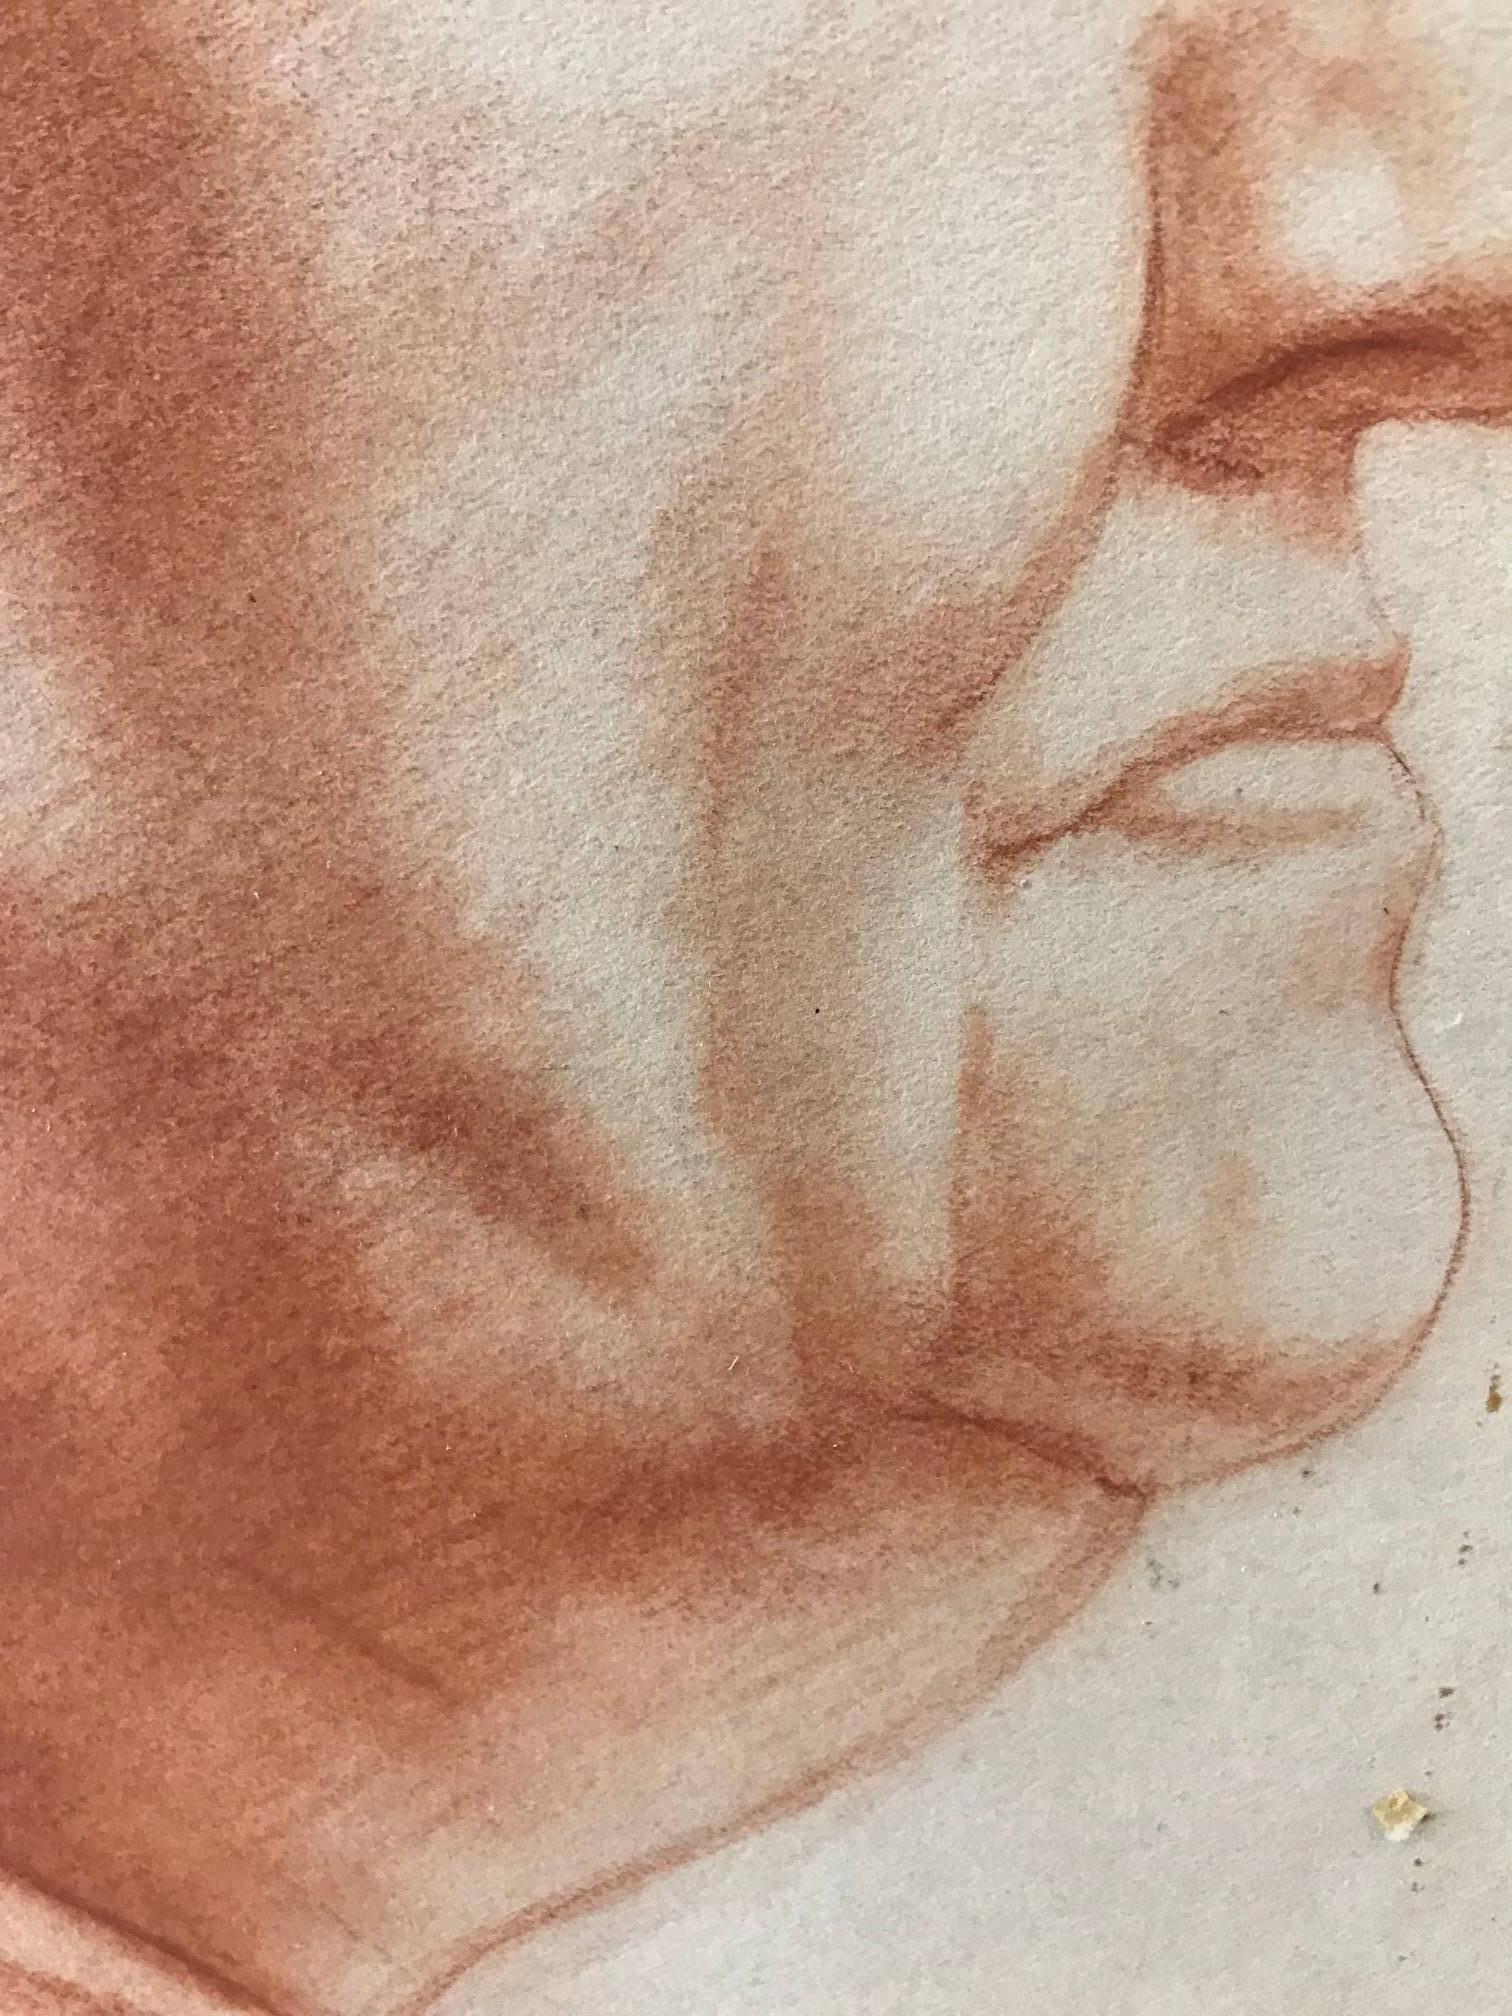 Venice (Red Charcoal Profile of an Elderly Lady) - Gray Figurative Art by John Gilroy